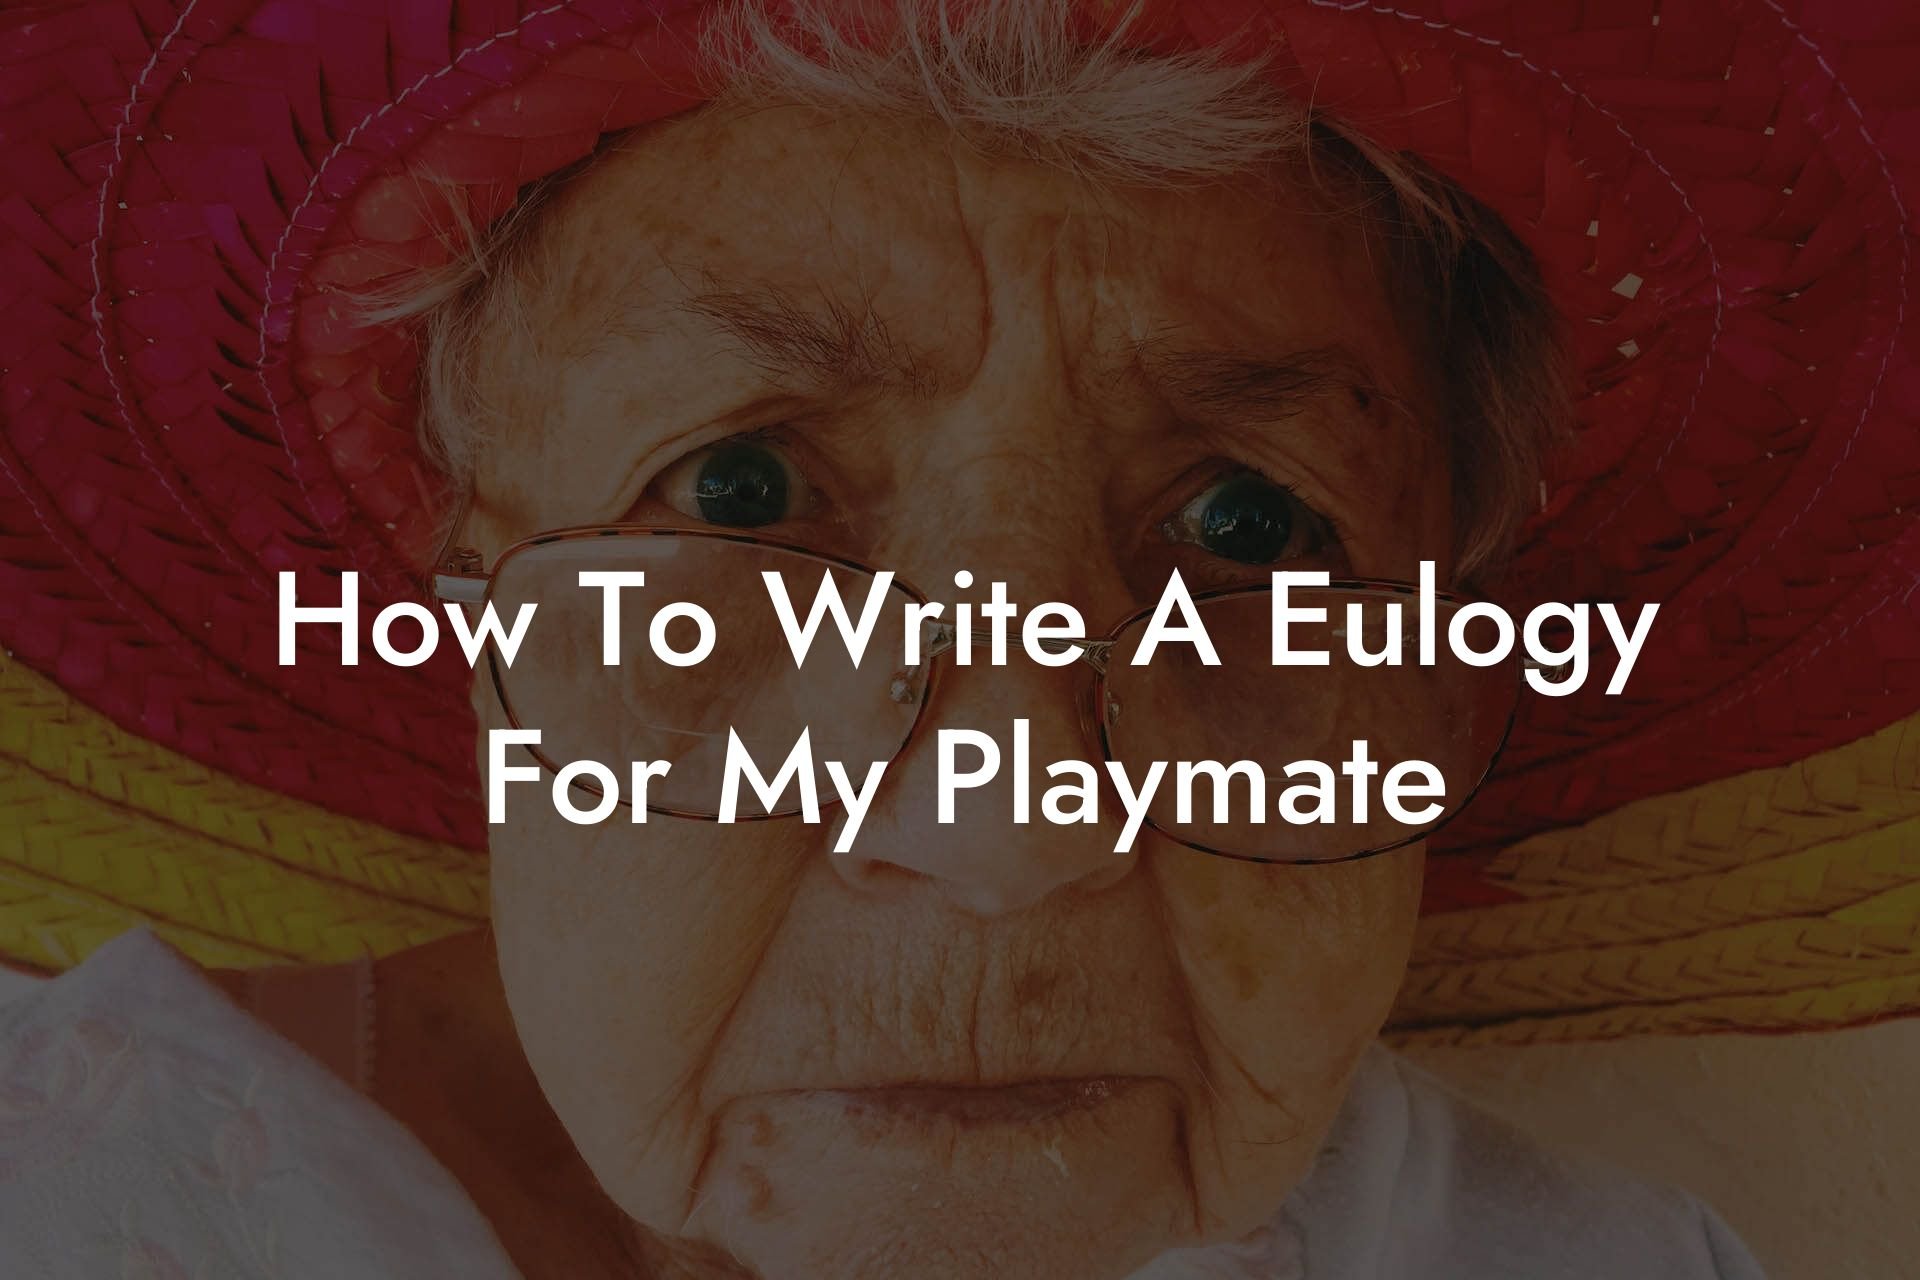 How To Write A Eulogy For My Playmate